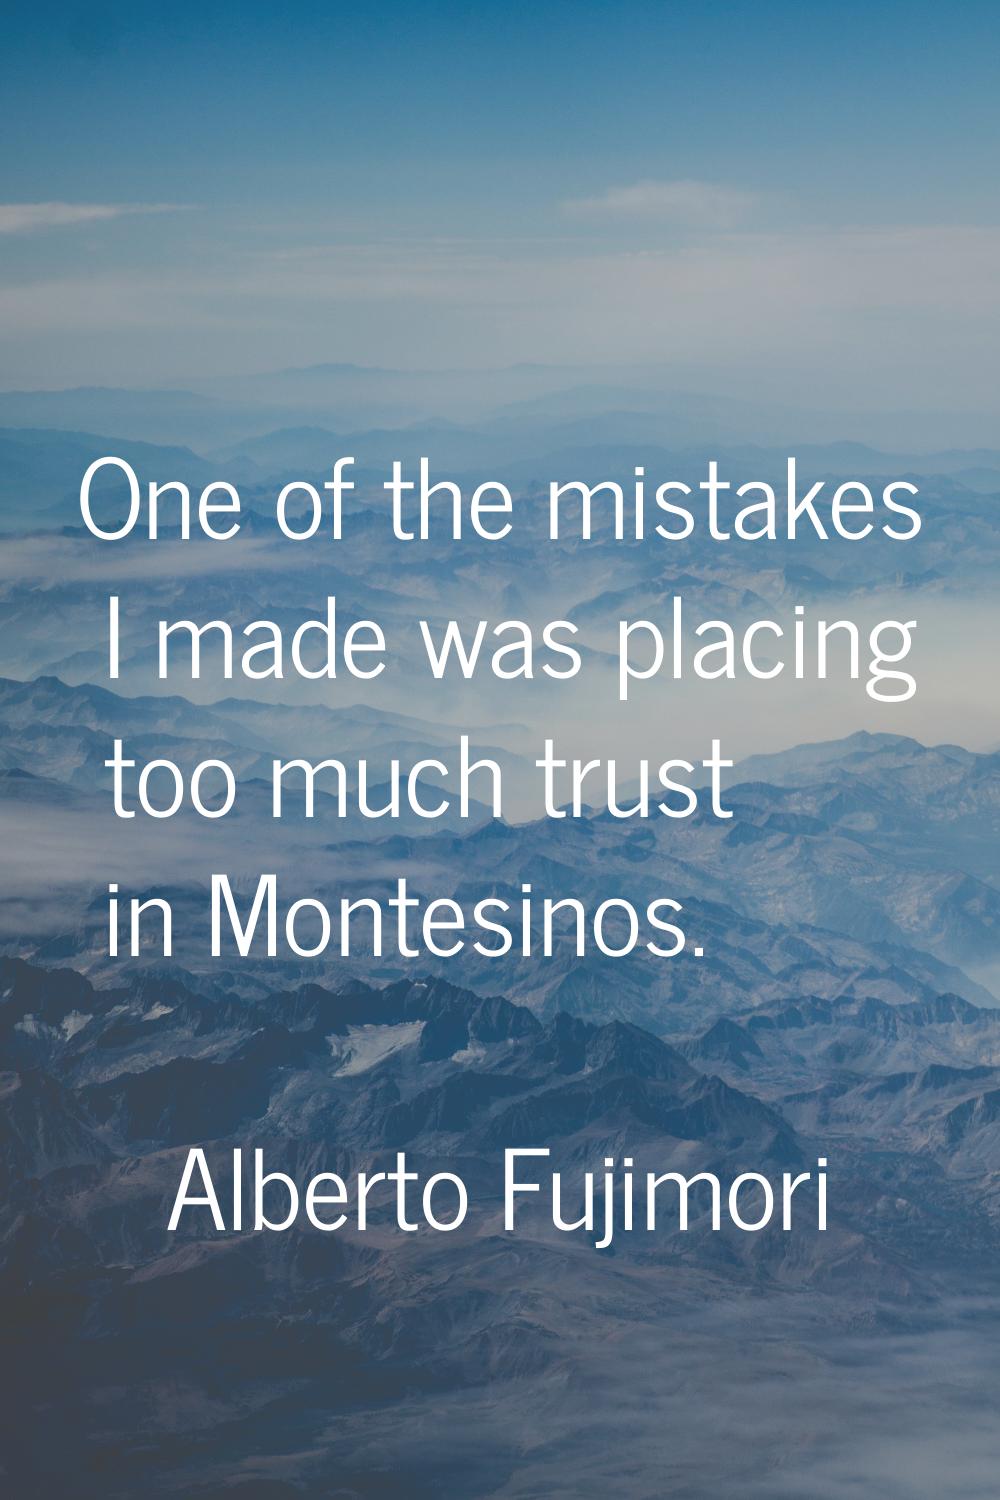 One of the mistakes I made was placing too much trust in Montesinos.